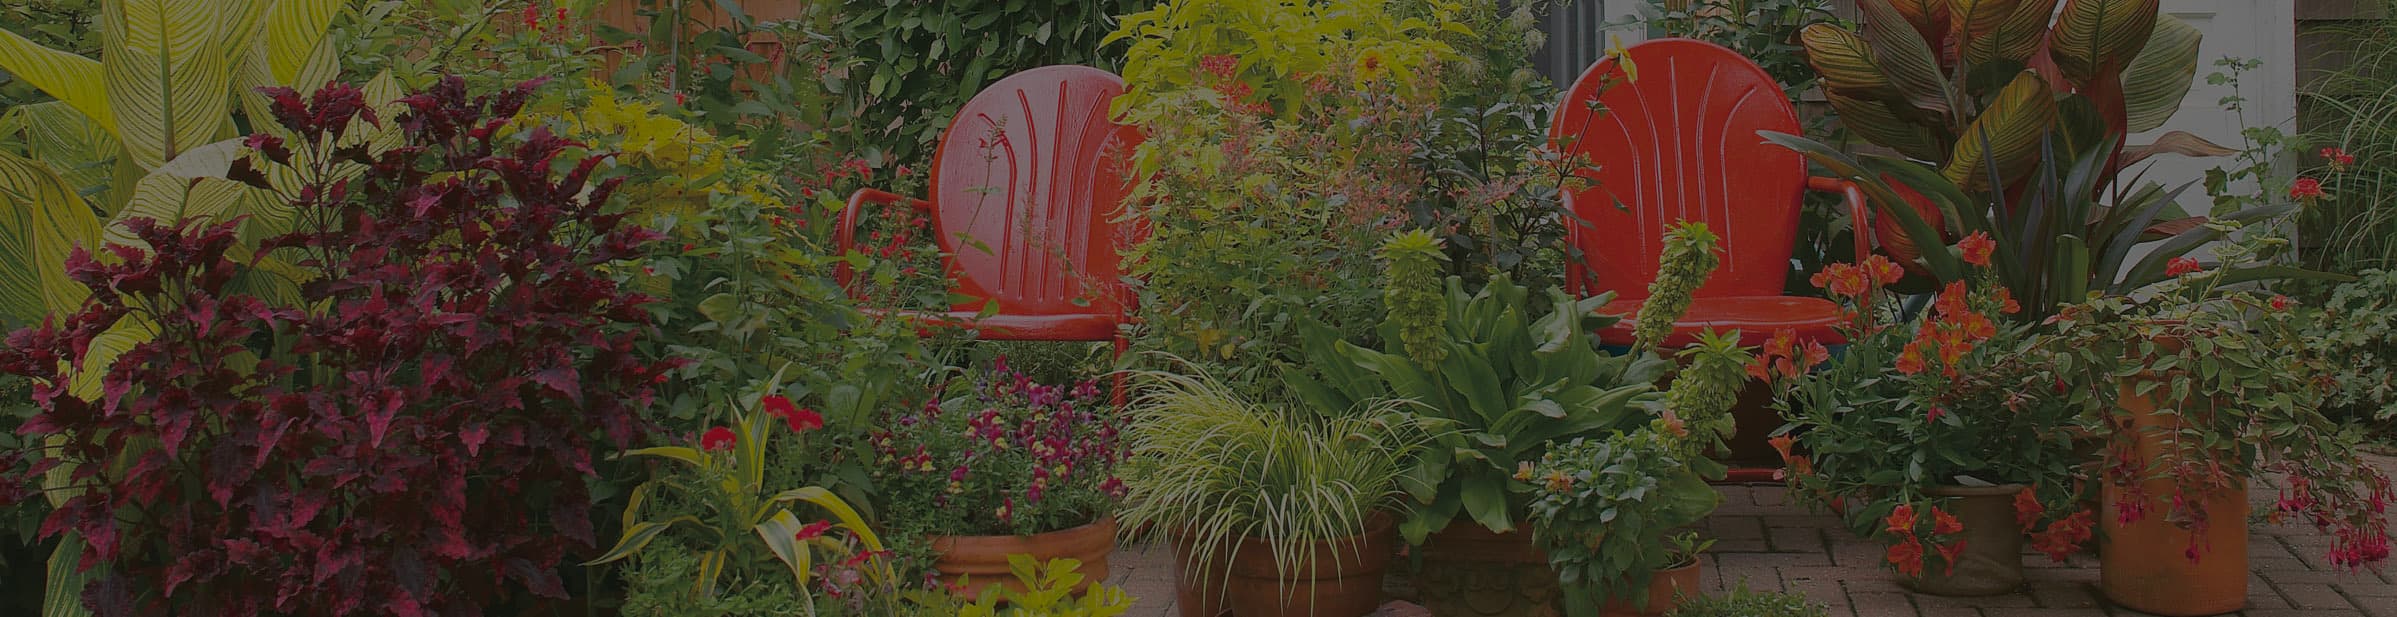 garden with two red chairs